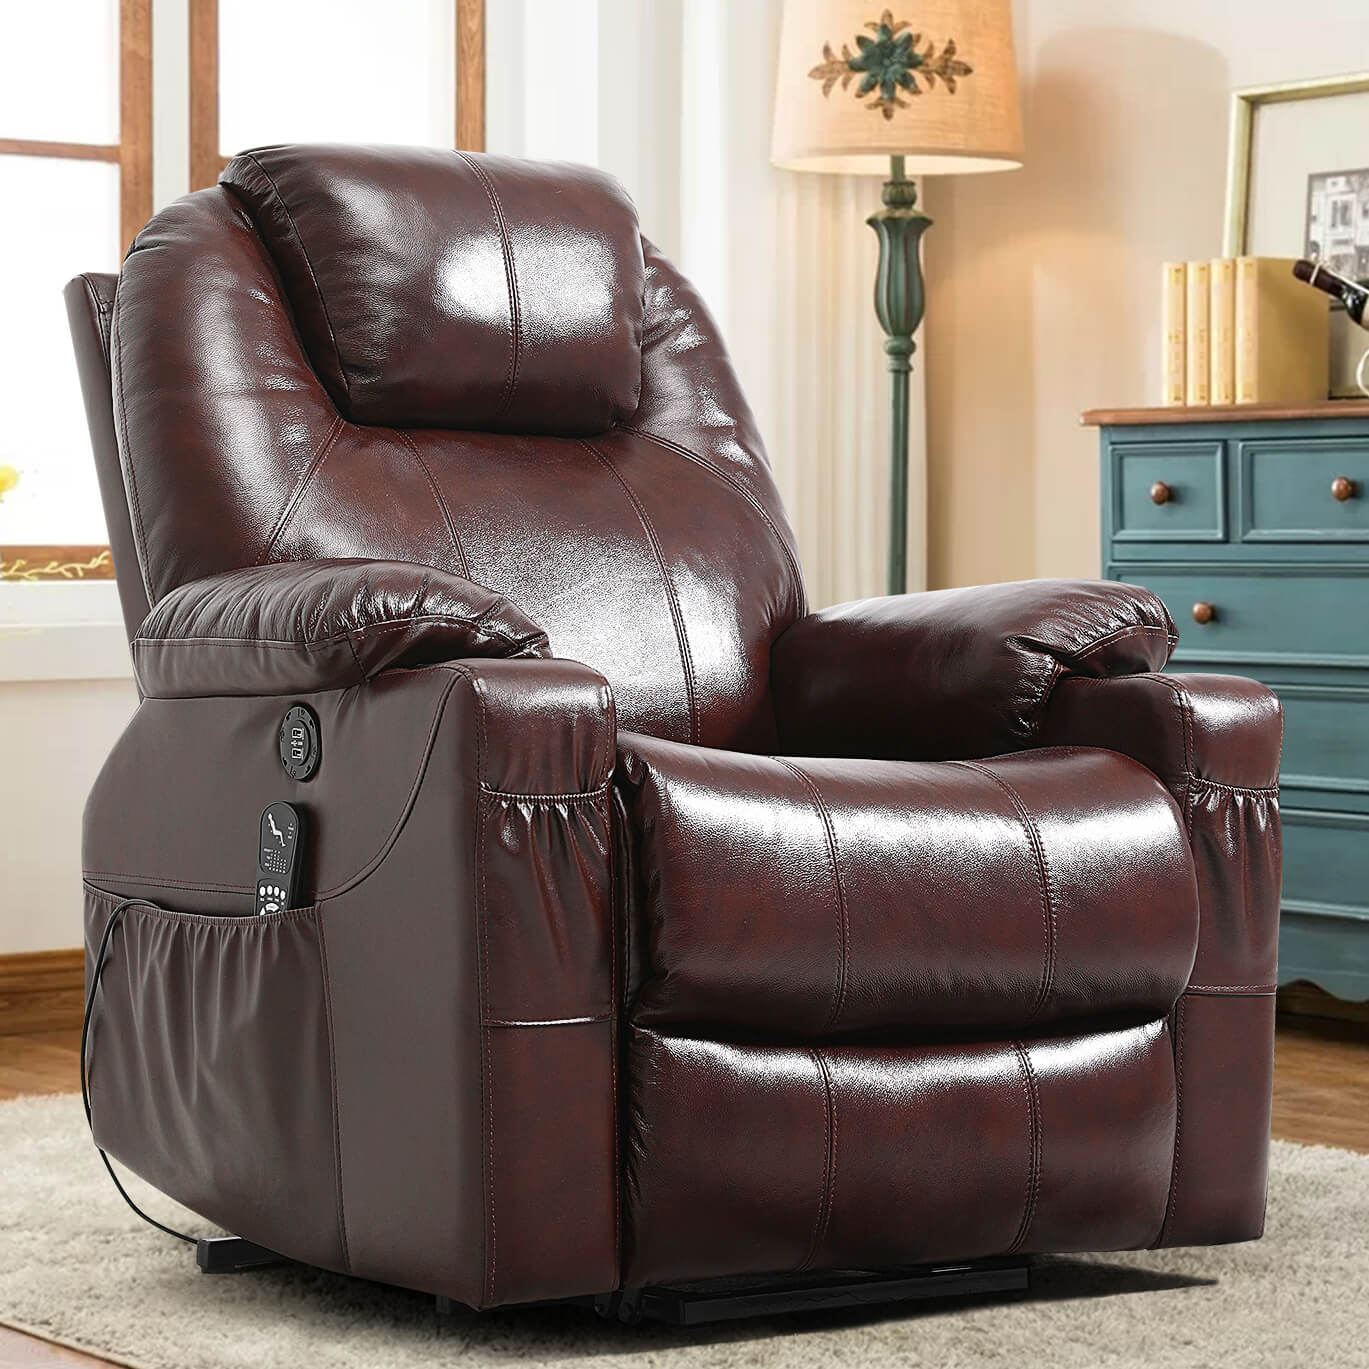 Soulout genuine leather brown lift chair recliners